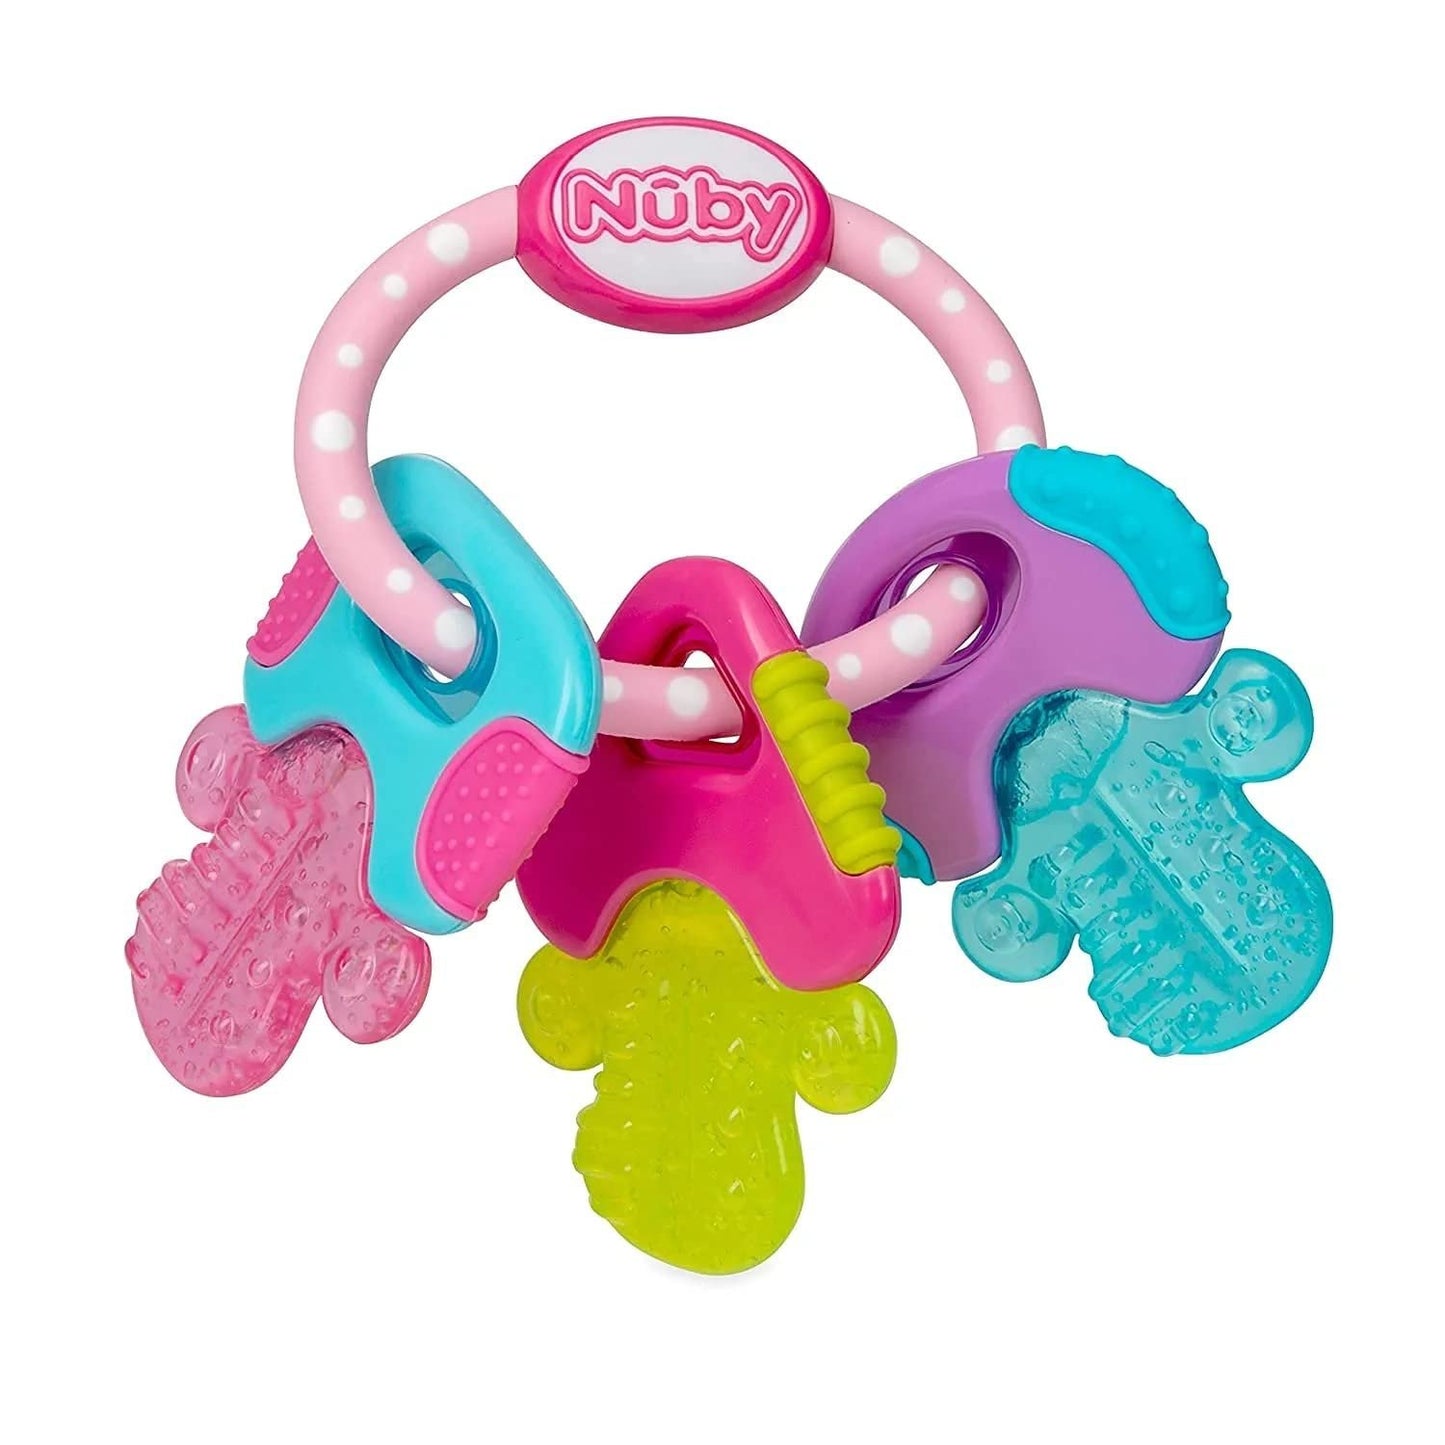 Nuby IcyBite Popsicle, Donut and Ice Cream Teether Ring and Ice Gel Teether Keys - 3+ Months